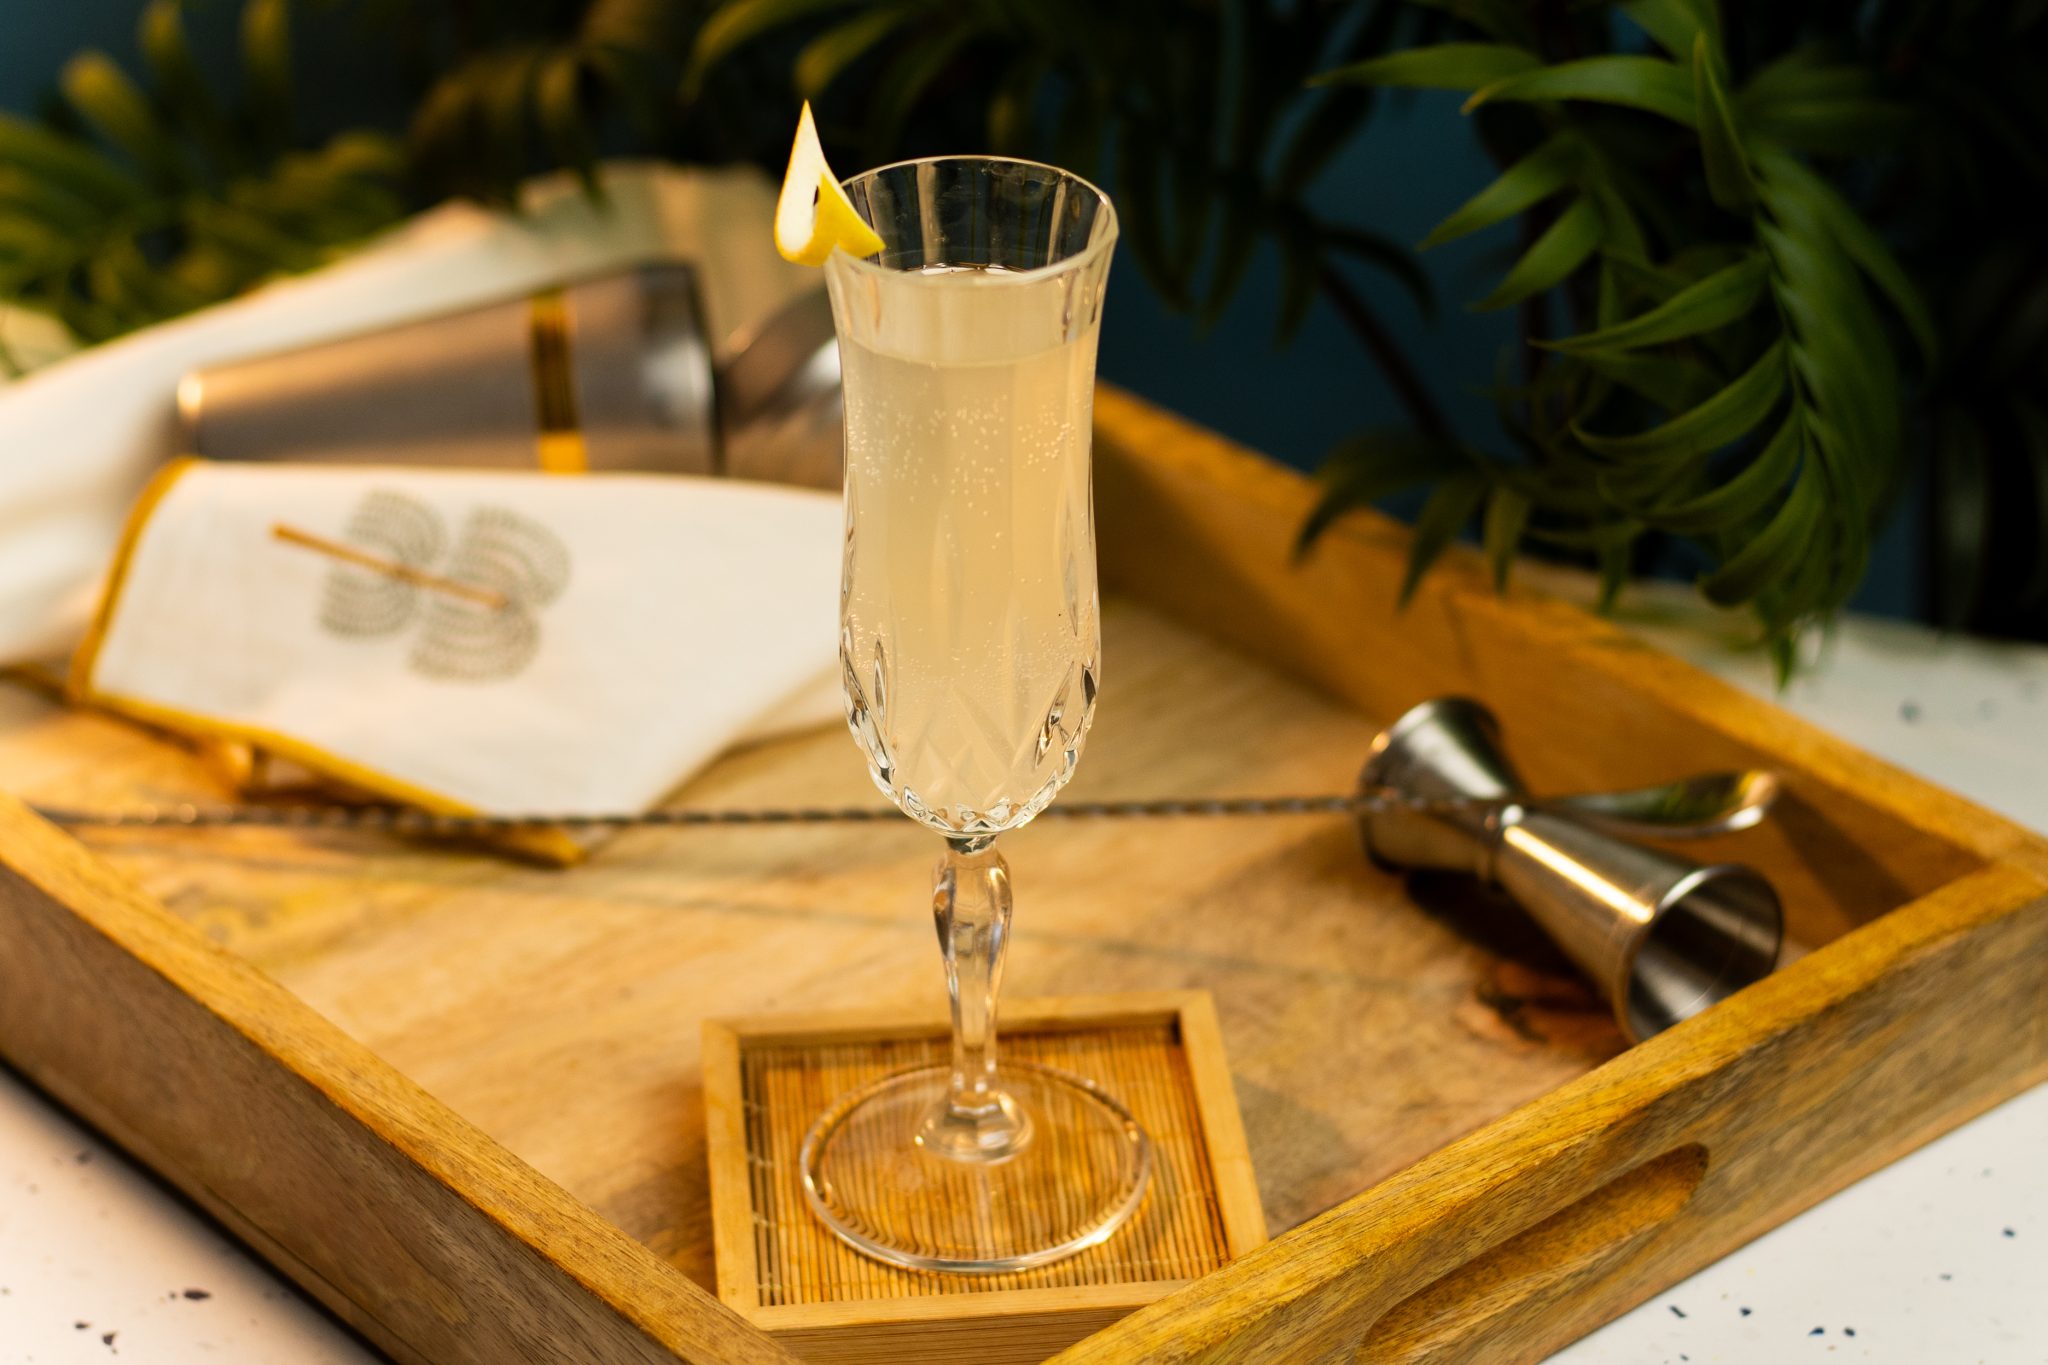 A side shot of a French 75 cocktail in a champagne flute on a wooden coaster placed on a wooden tray surrounded by a jigger, a bar spoon and a white cloth